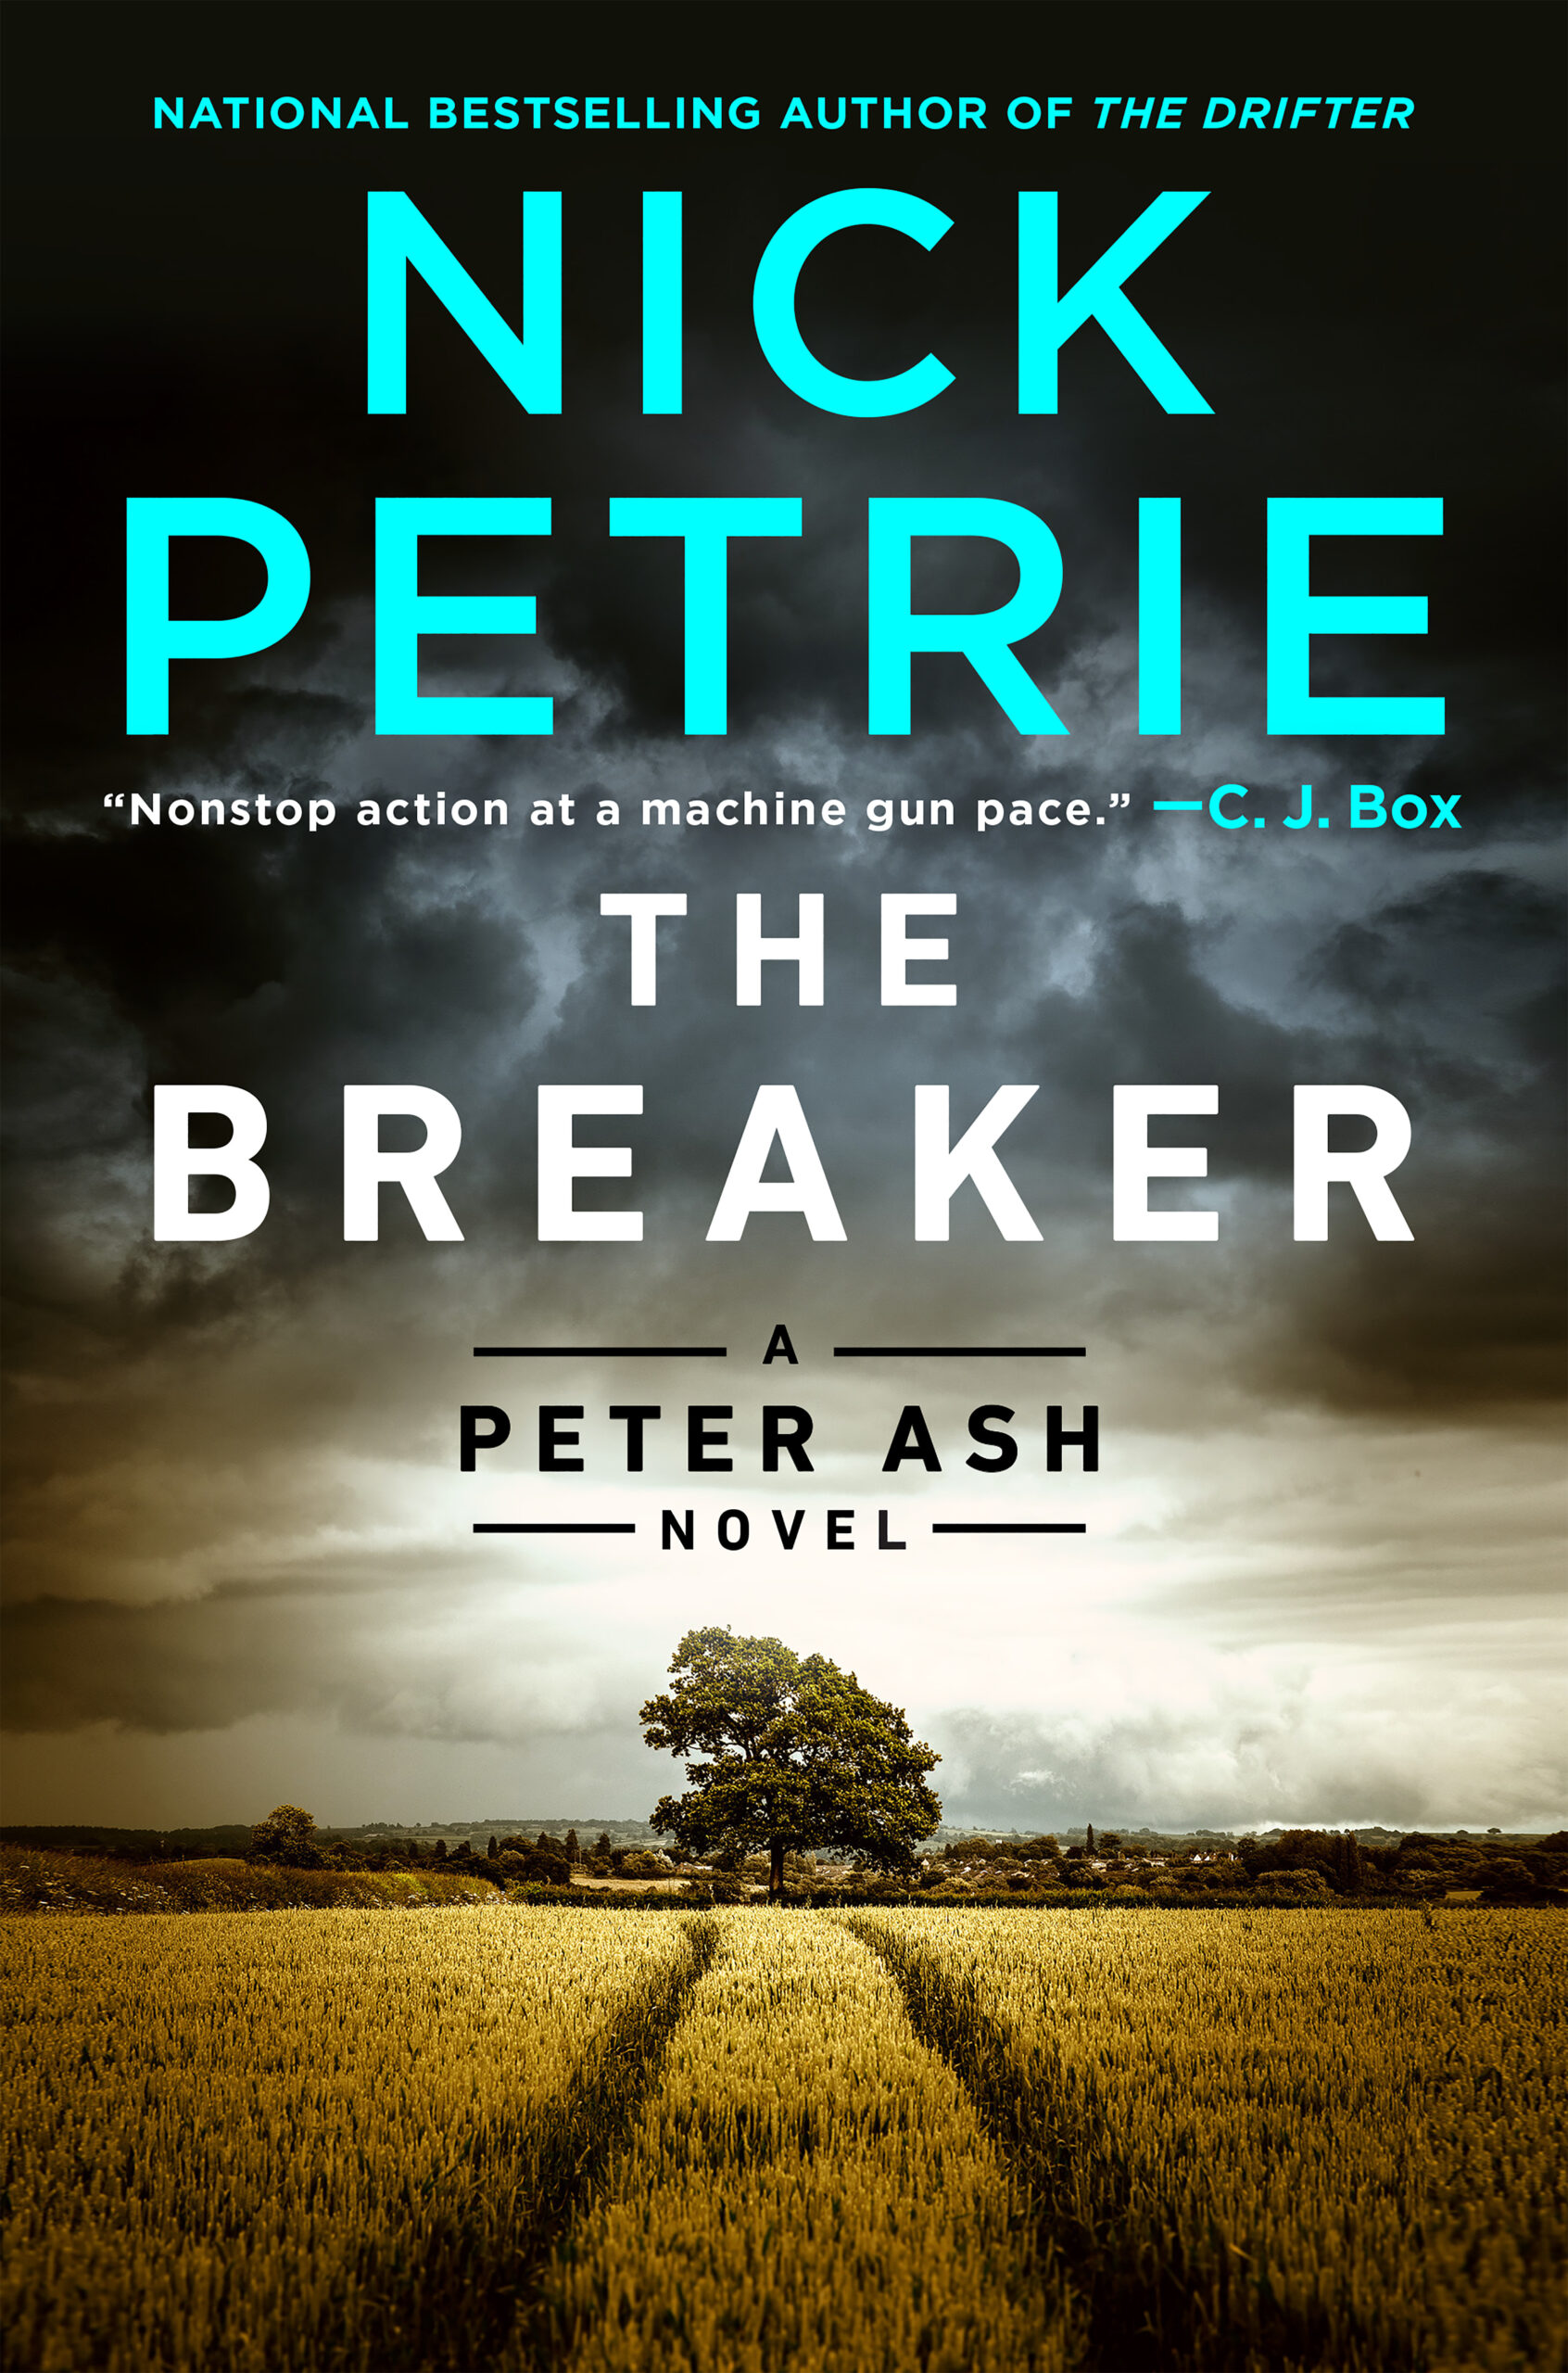 Book cover for, "The Breaker" by Nick Petrie